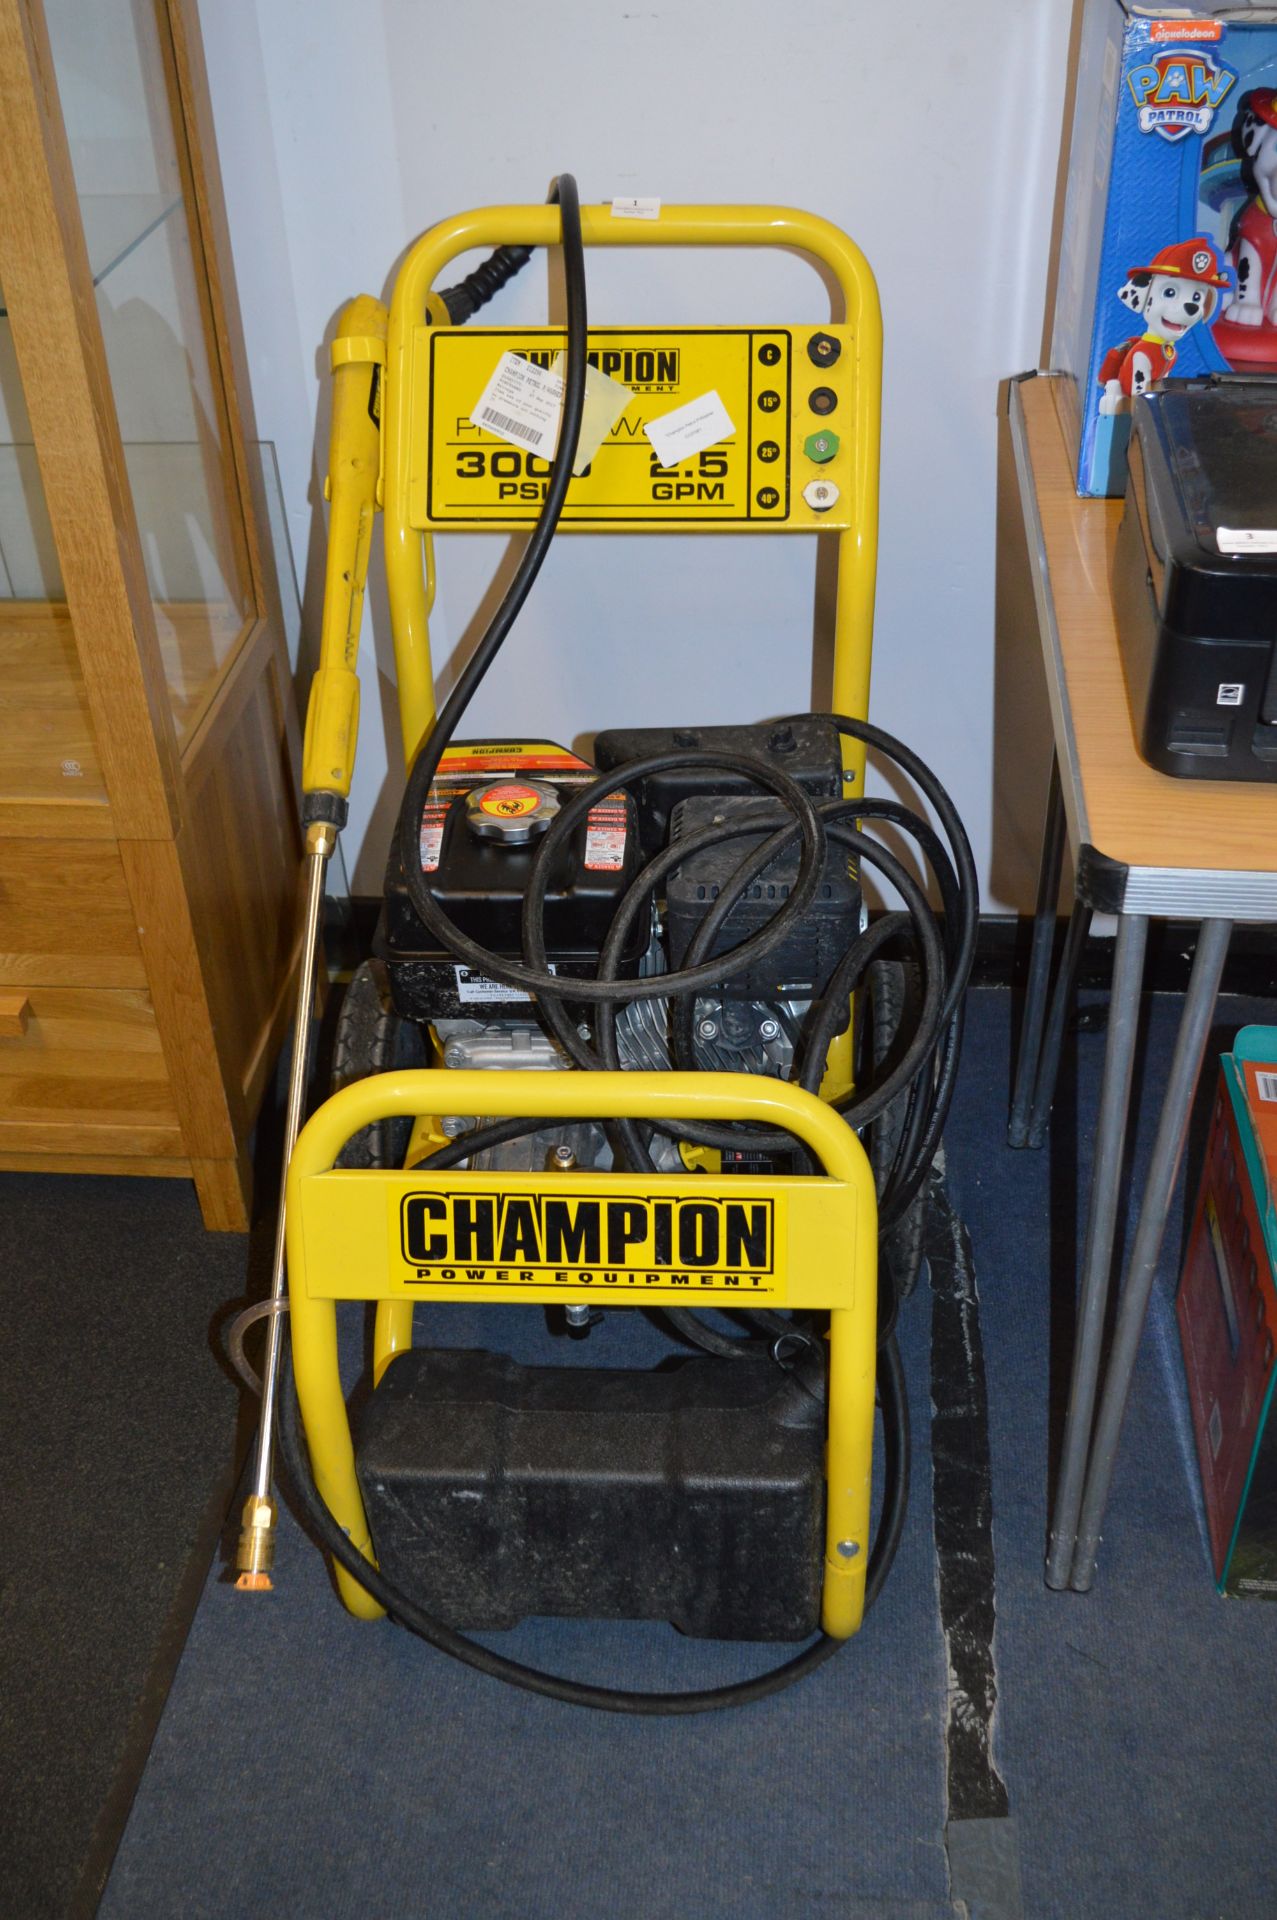 *Champion Petrol Drive Cold Water Pressure Washer